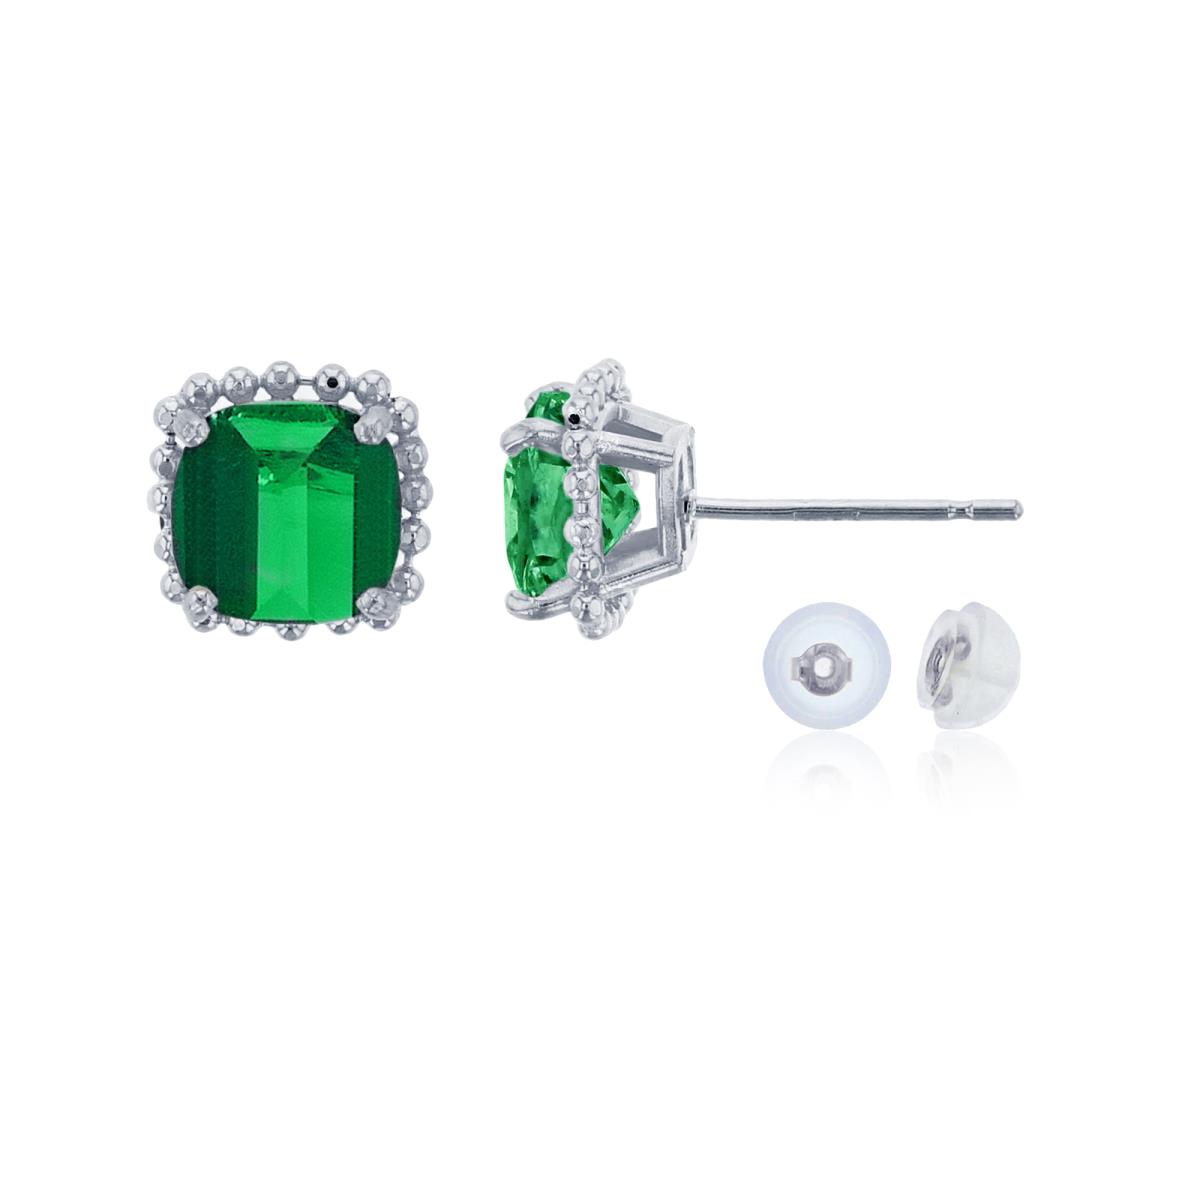 10K White Gold 6x6mm Cushion Cut Created Emerald Bead Frame Stud Earring with Silicone Back